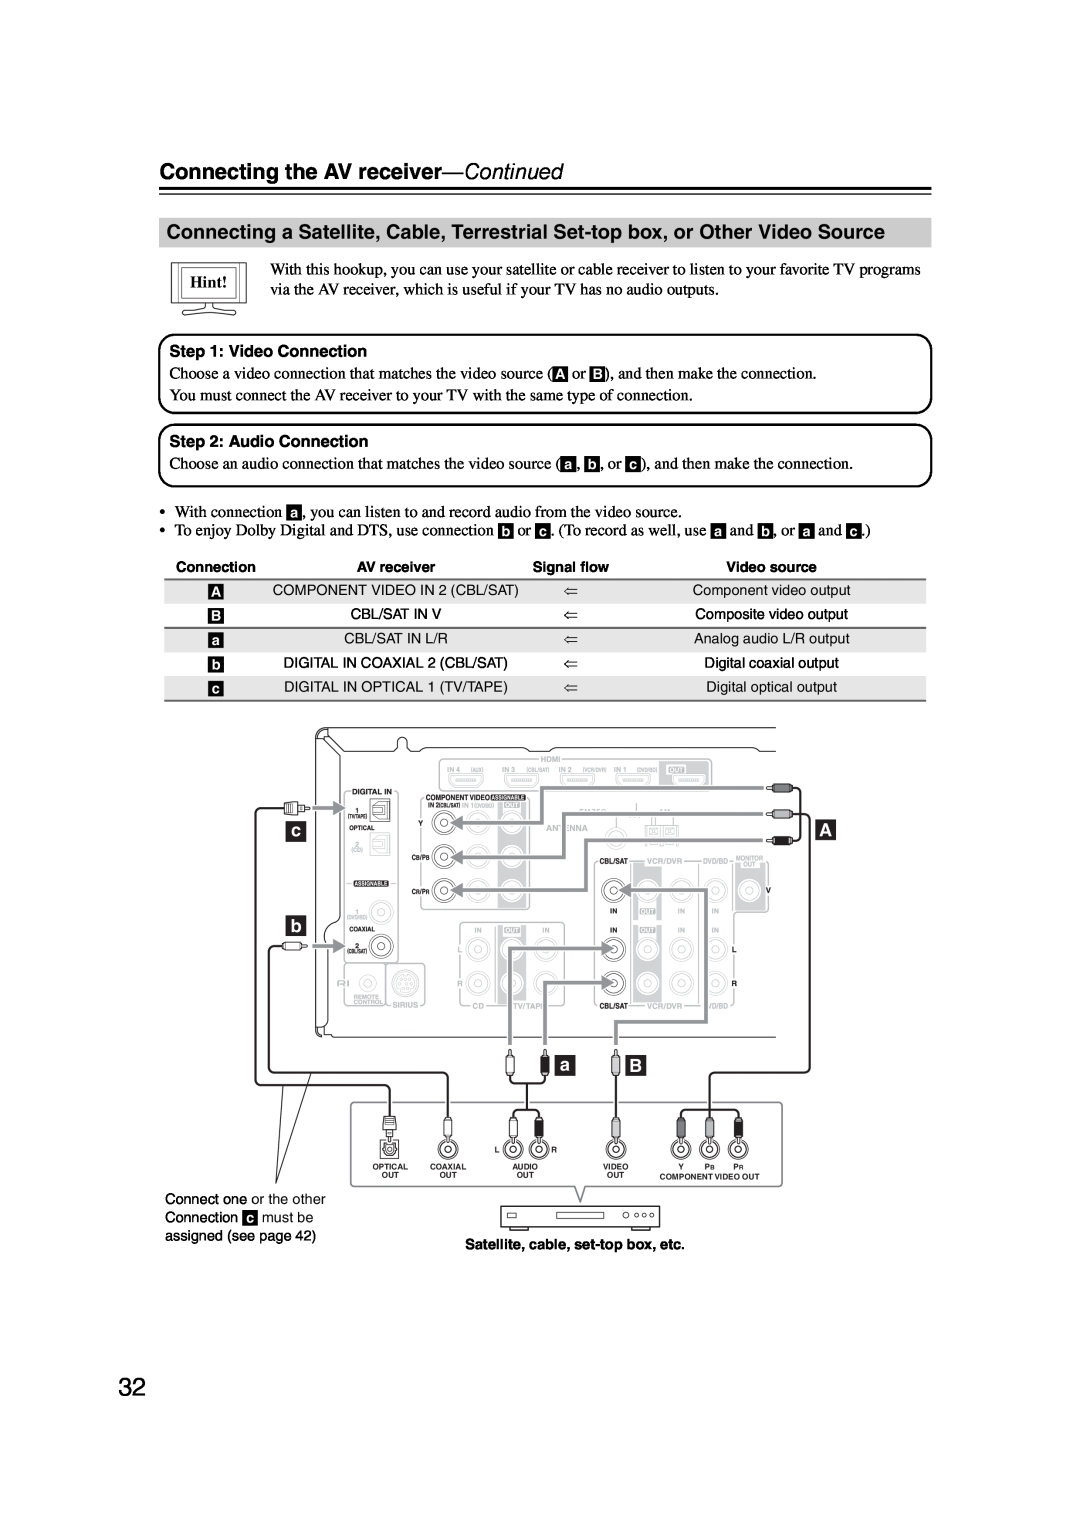 Onkyo 29344934 instruction manual Connecting the AV receiver—Continued, Hint, Satellite, cable, set-topbox, etc 